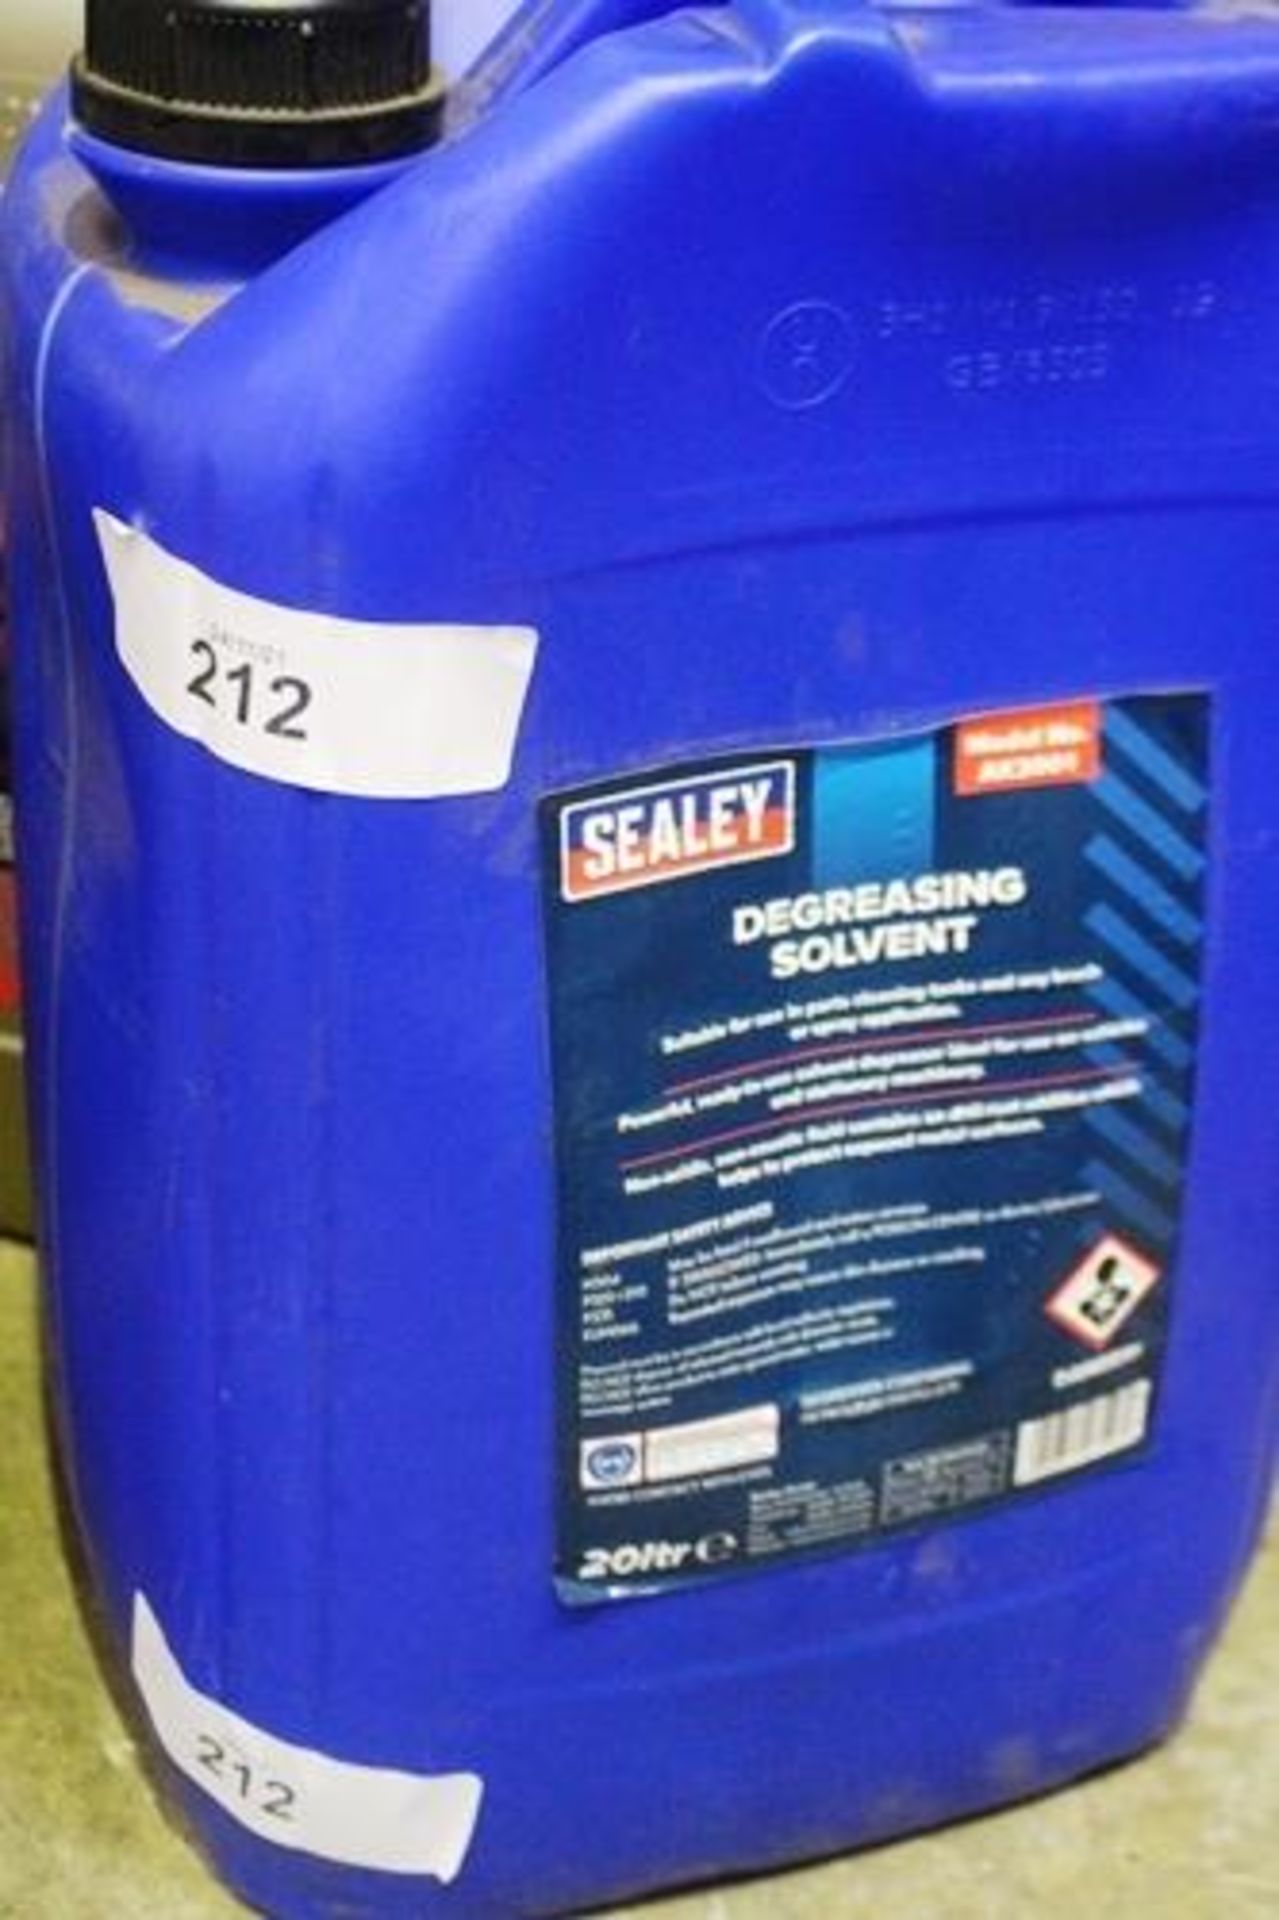 1 x 20lr bottle of Sealey degreasing solvent, AK2001- New (GS9)